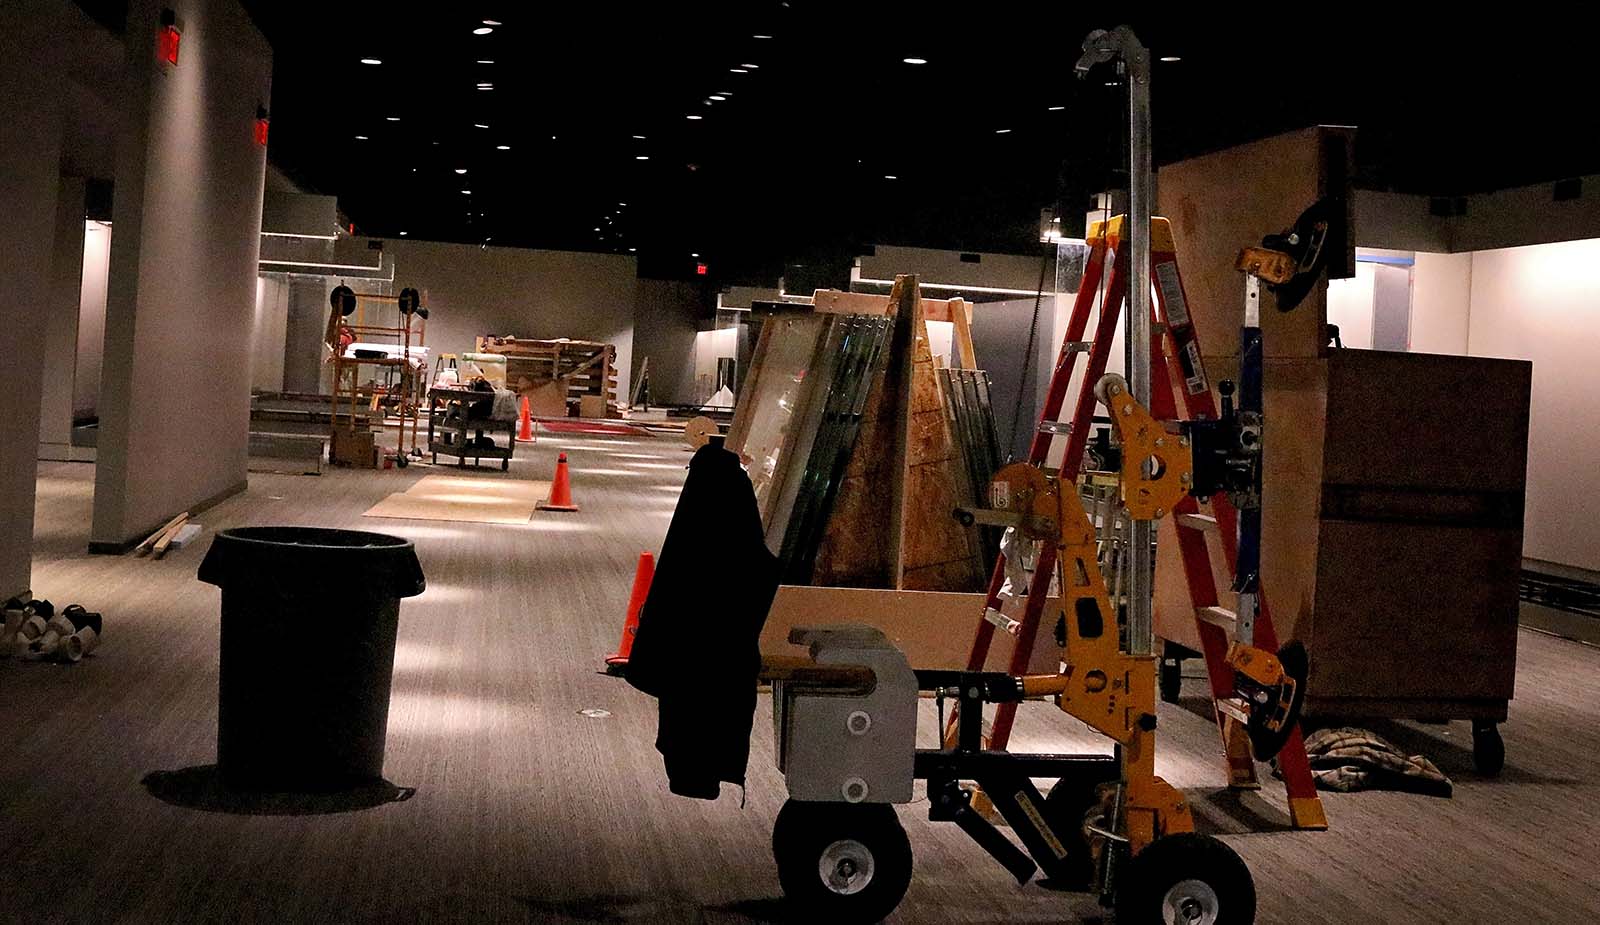 Cody Firearms Museum space during renovation.